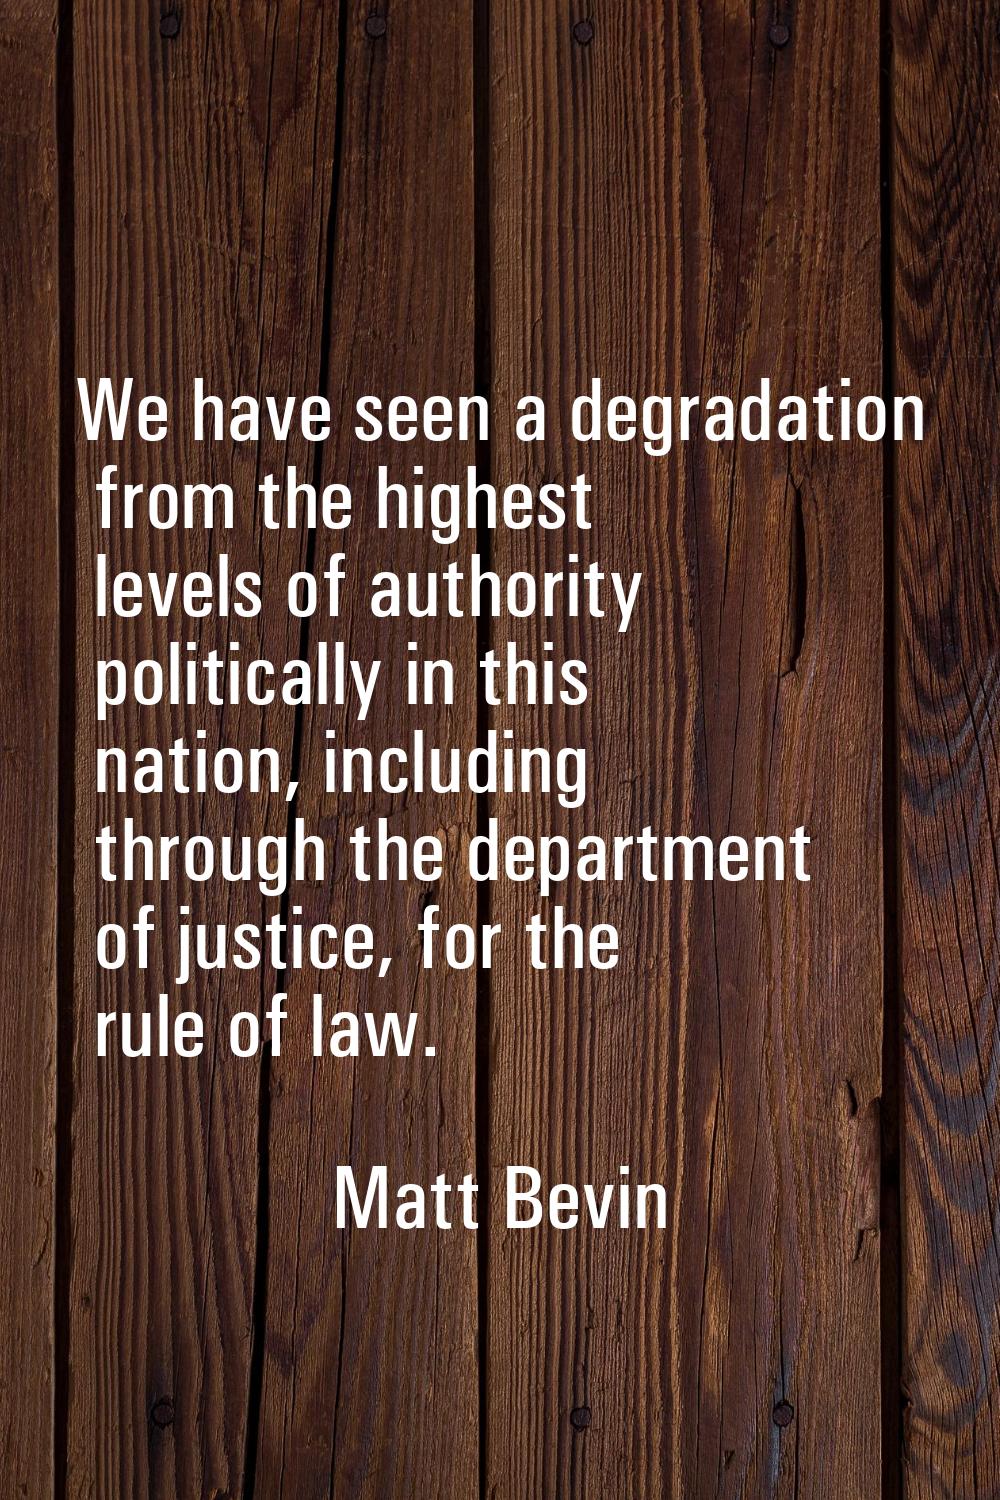 We have seen a degradation from the highest levels of authority politically in this nation, includi